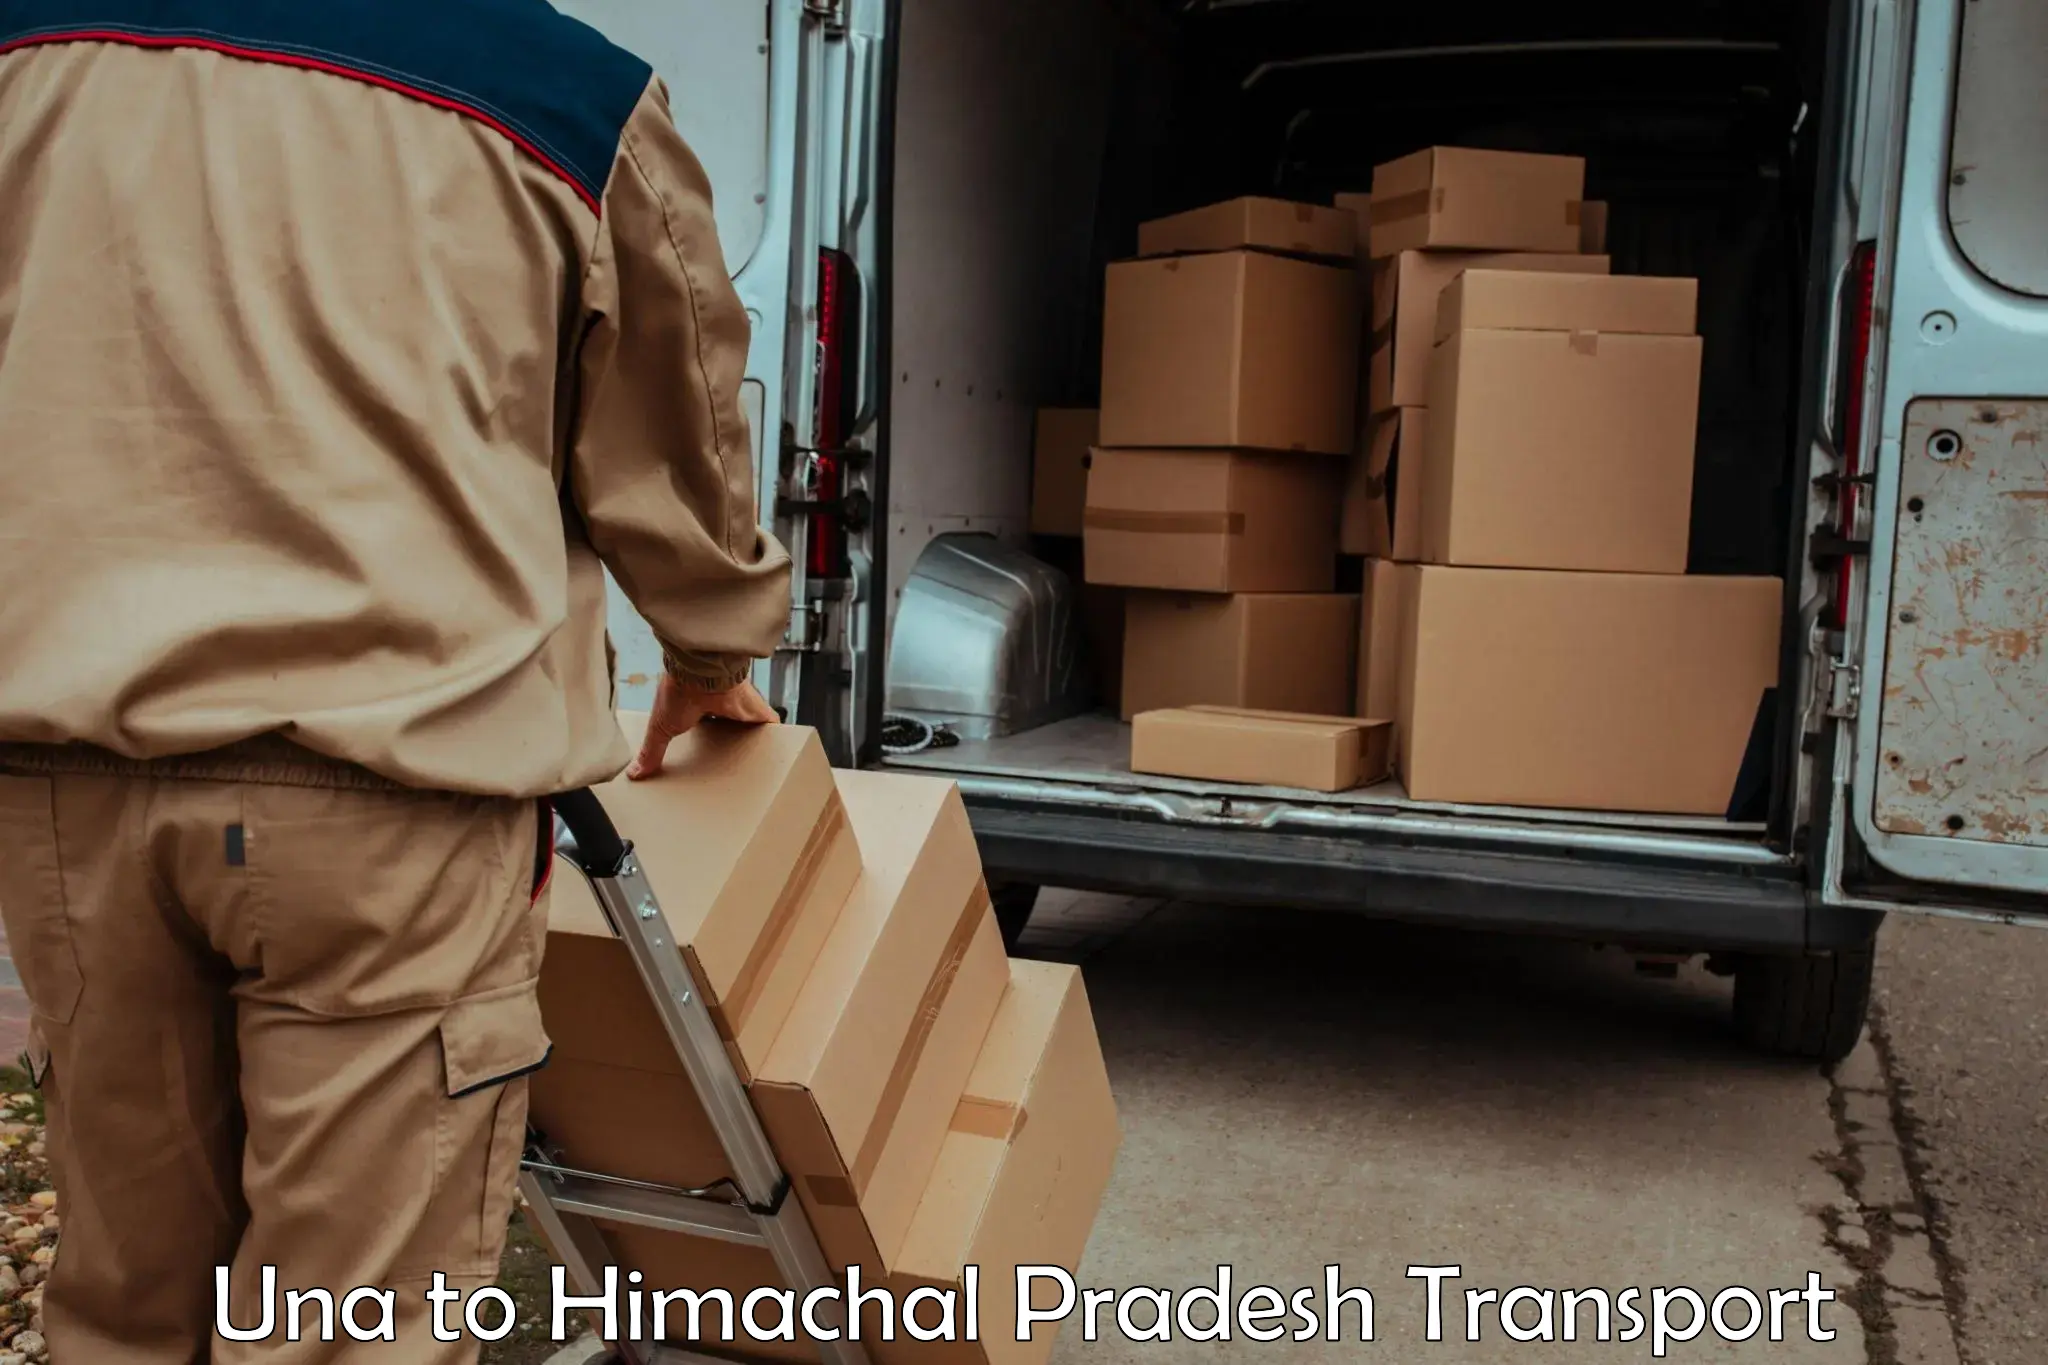 Air freight transport services Una to Himachal Pradesh